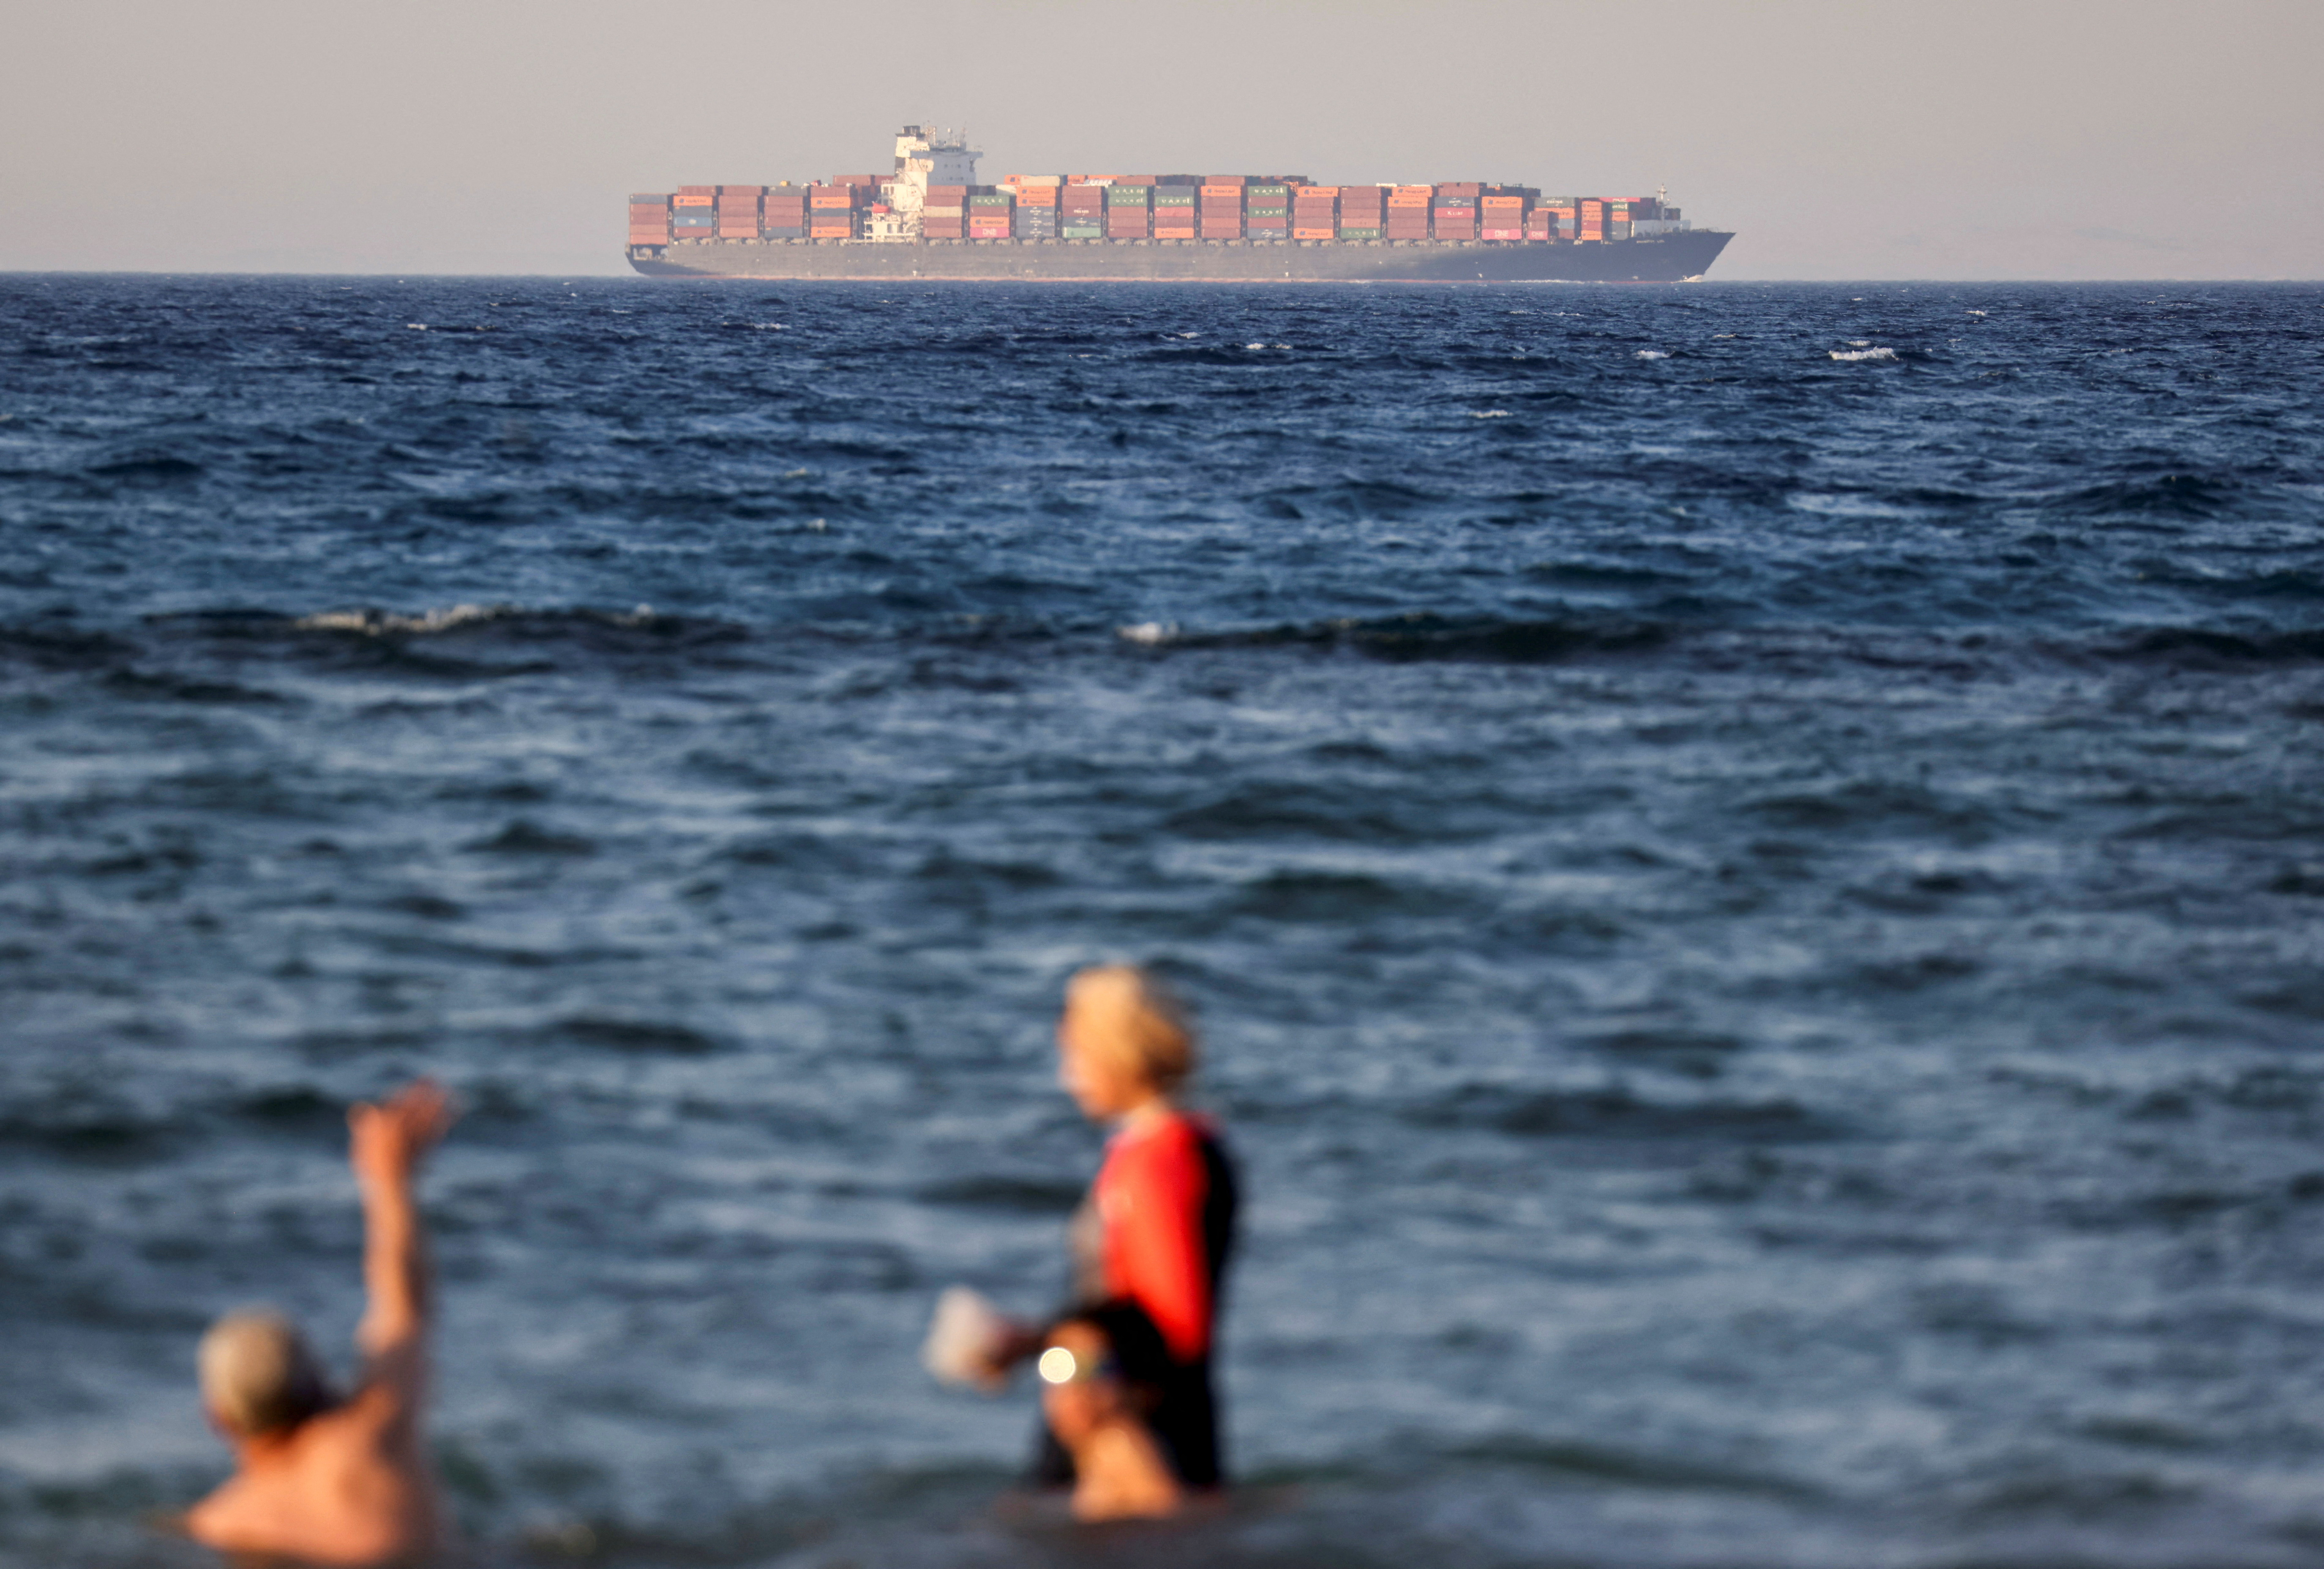 A container ship crosses the Gulf of Suez towards the Red Sea before entering the Suez Canal, in Al-'Ain al-Sokhna